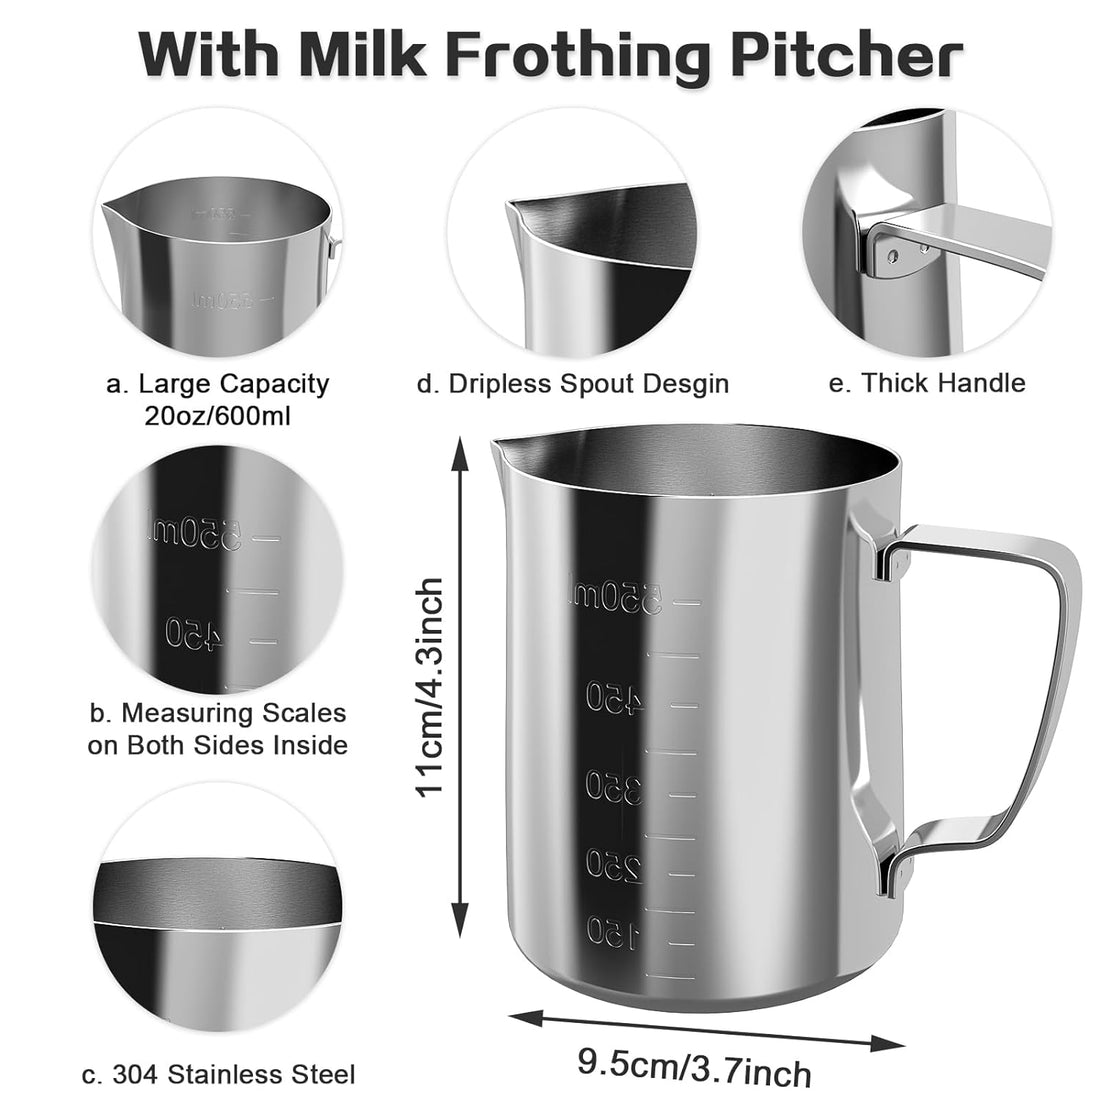 Electric Milk Frother, Maexus Rechargeable Milk Frother Handheld, Milk Foam Maker for Coffee, Cappuccino, Lattes, Matcha, Hot Chocolate, with Milk Frothing Pitcher, Stainless Steel Silver